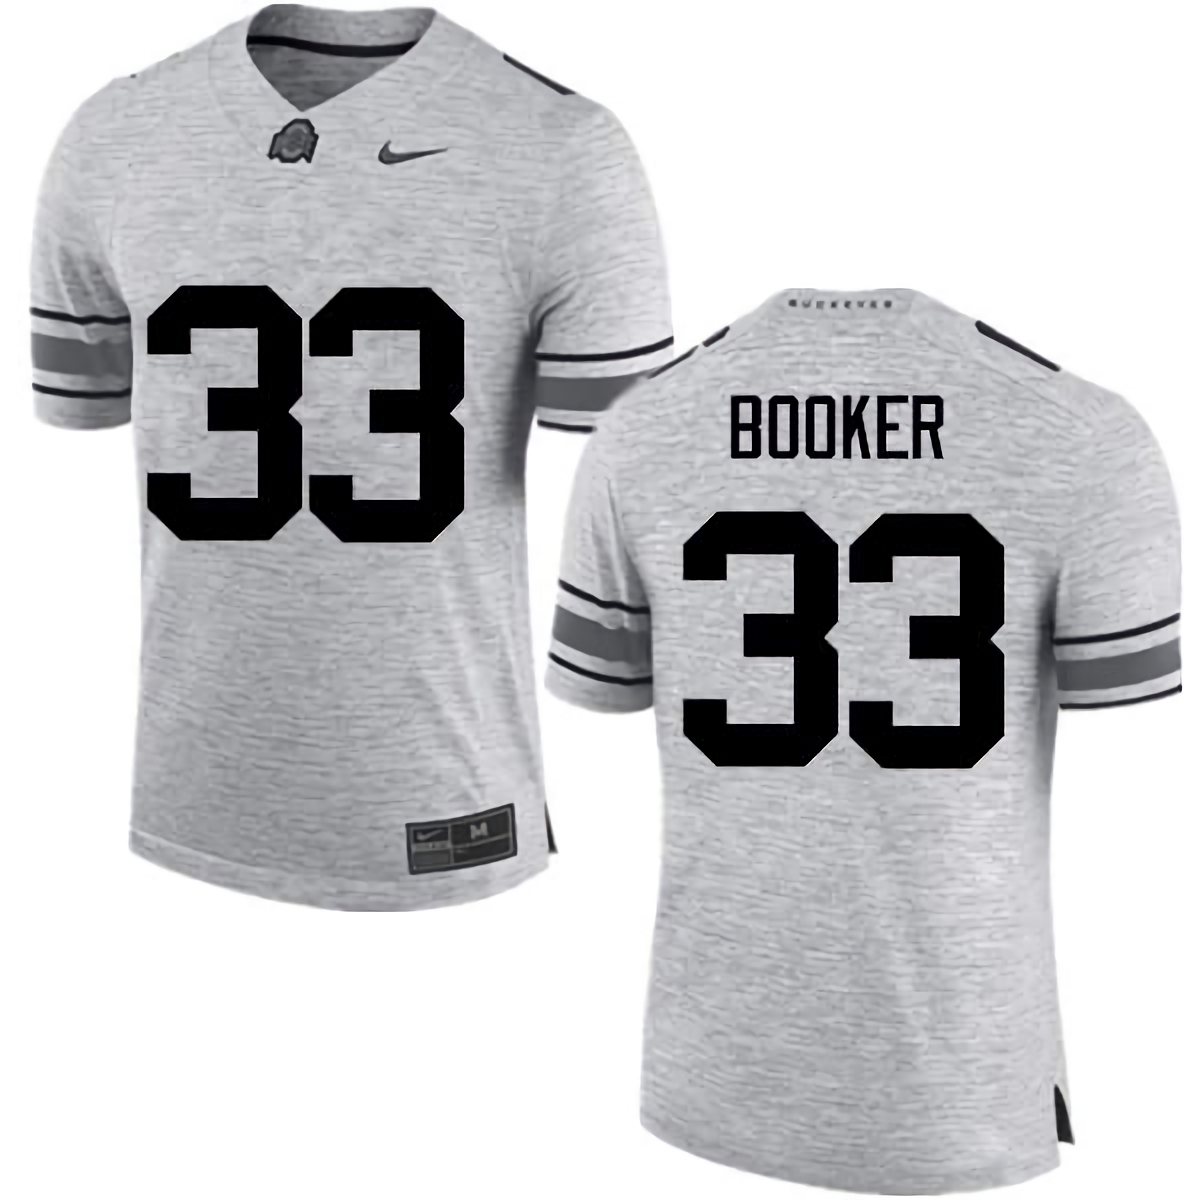 Dante Booker Ohio State Buckeyes Men's NCAA #33 Nike Gray College Stitched Football Jersey QKE3556HP